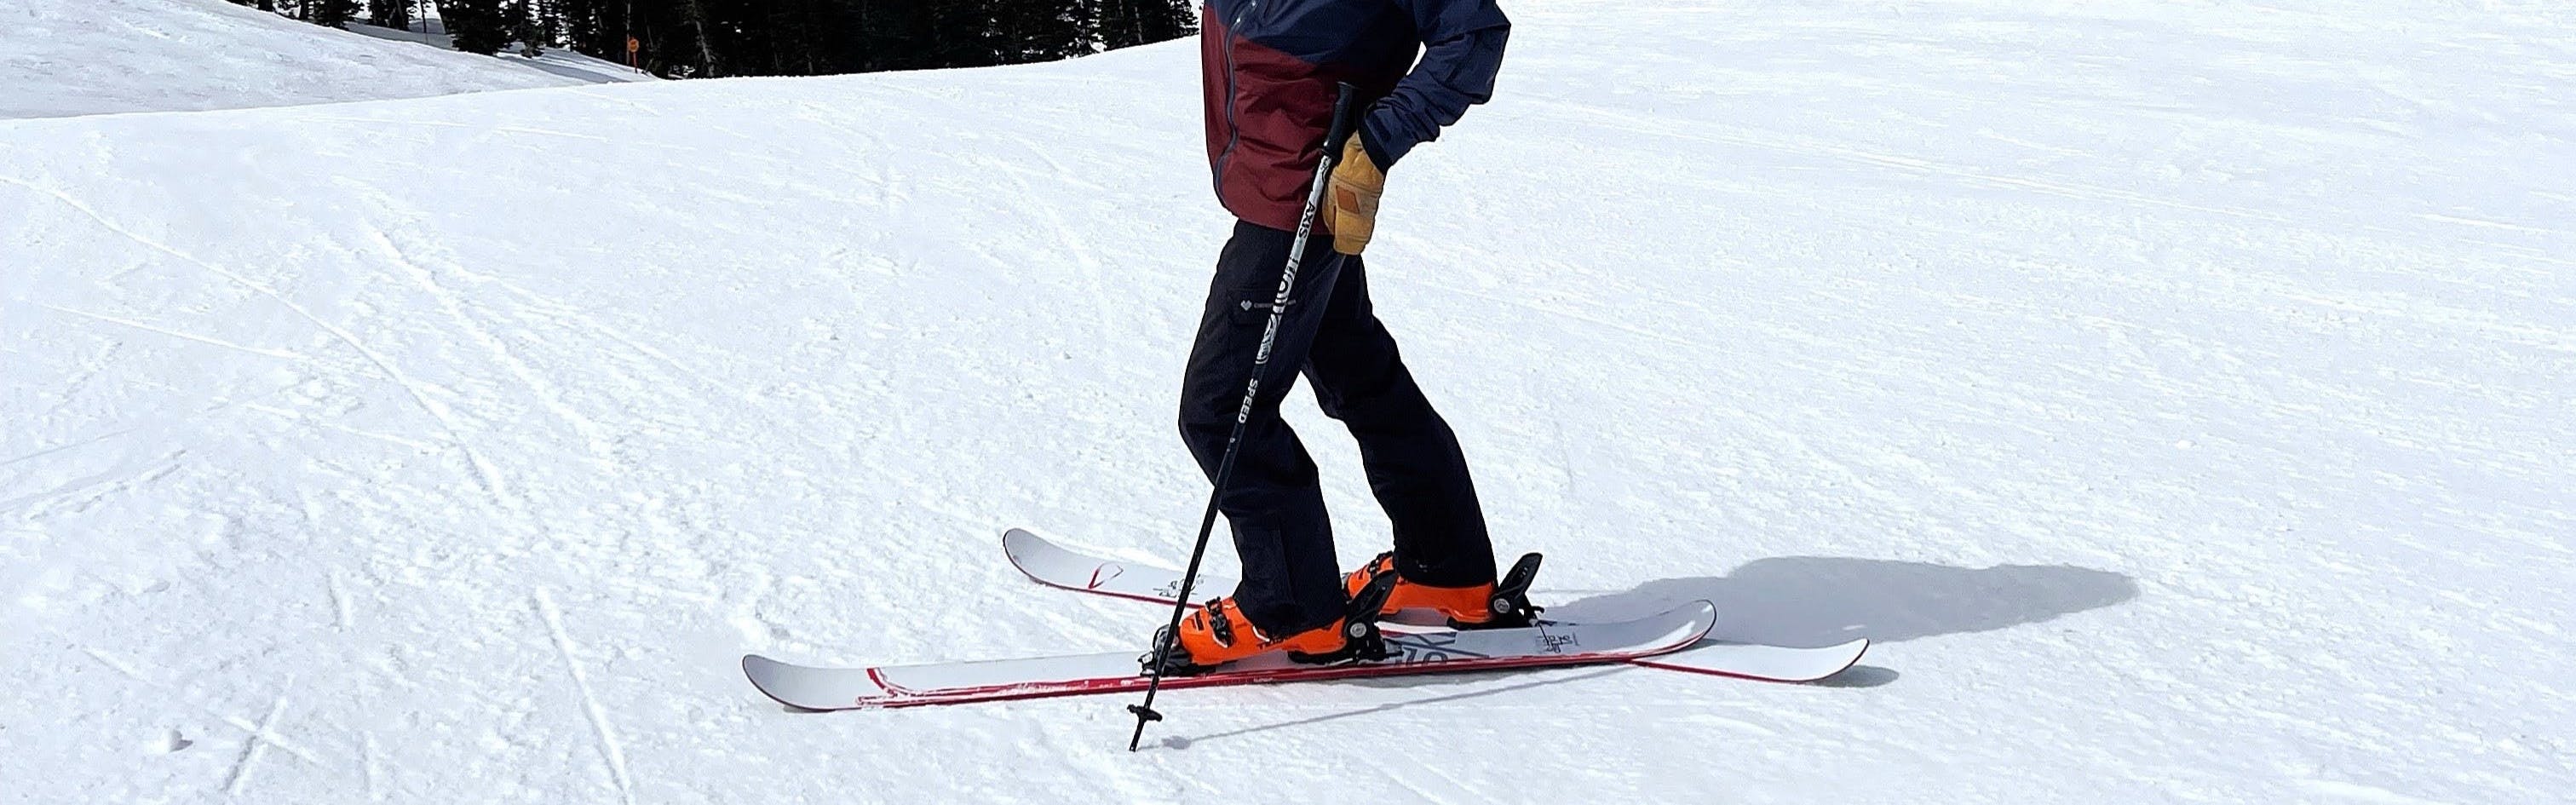 A man stands on his skis pointing with his pole.